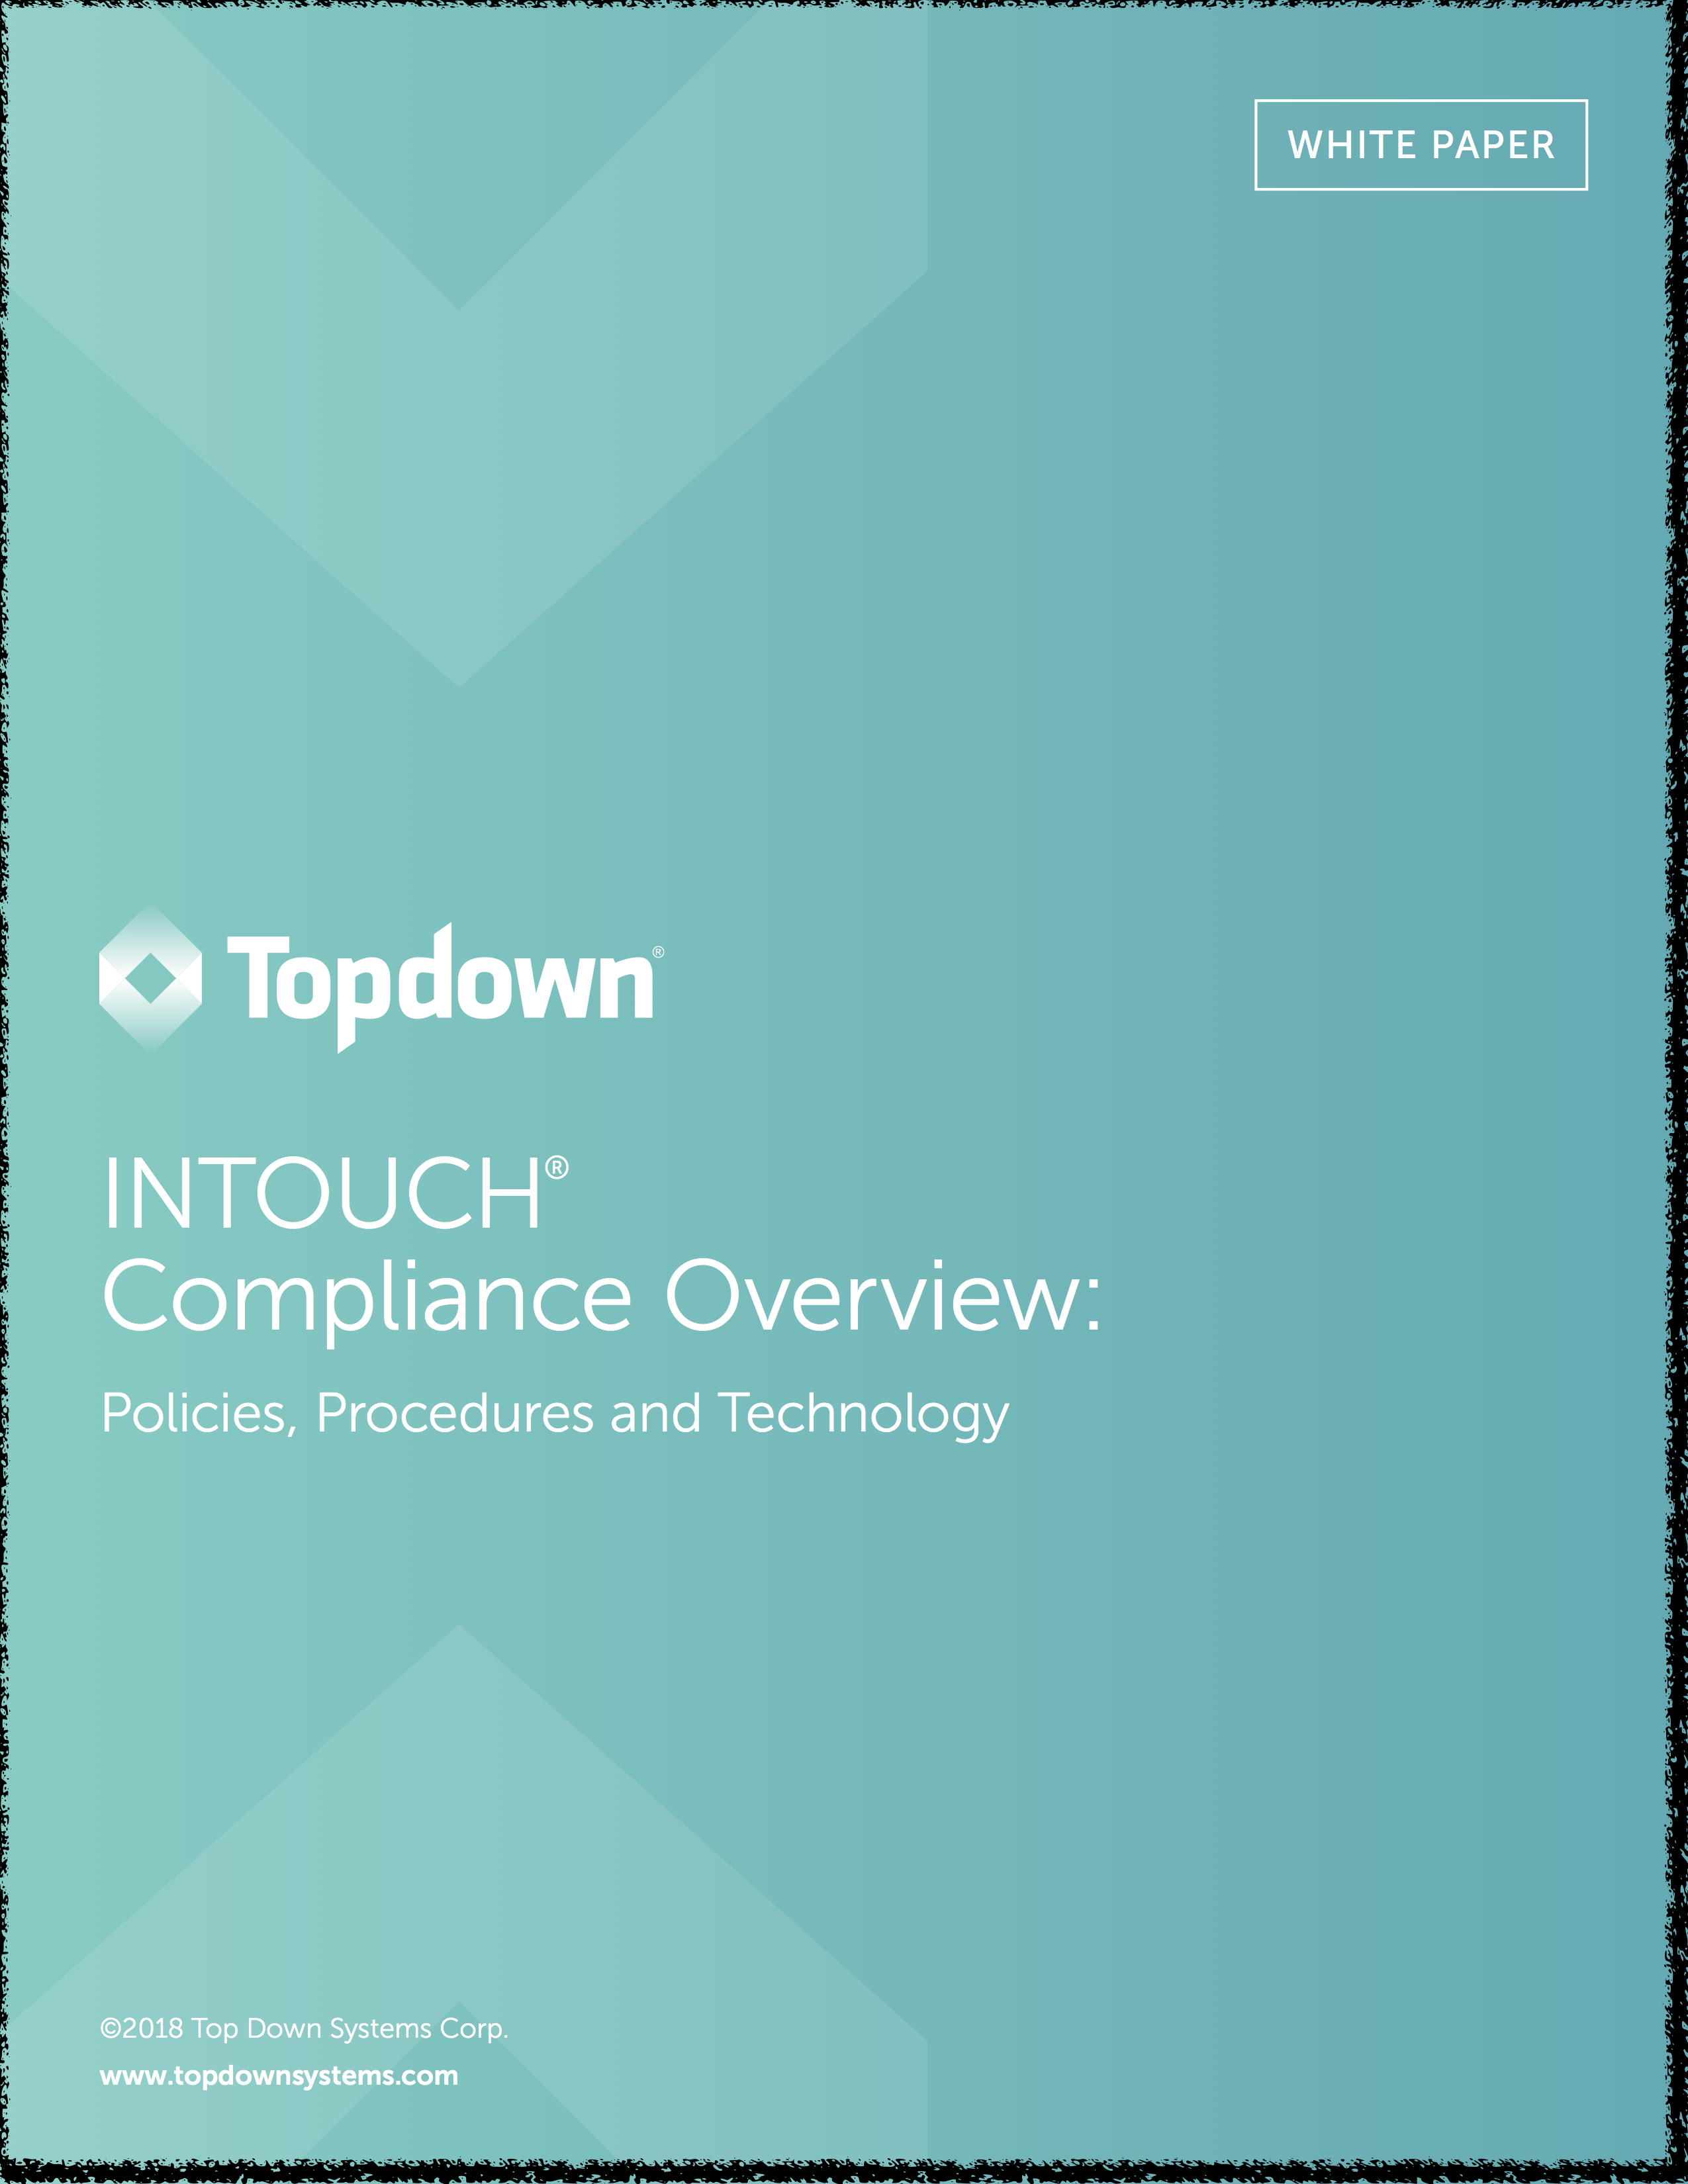 PDF on Topdown INTOUCH compliance